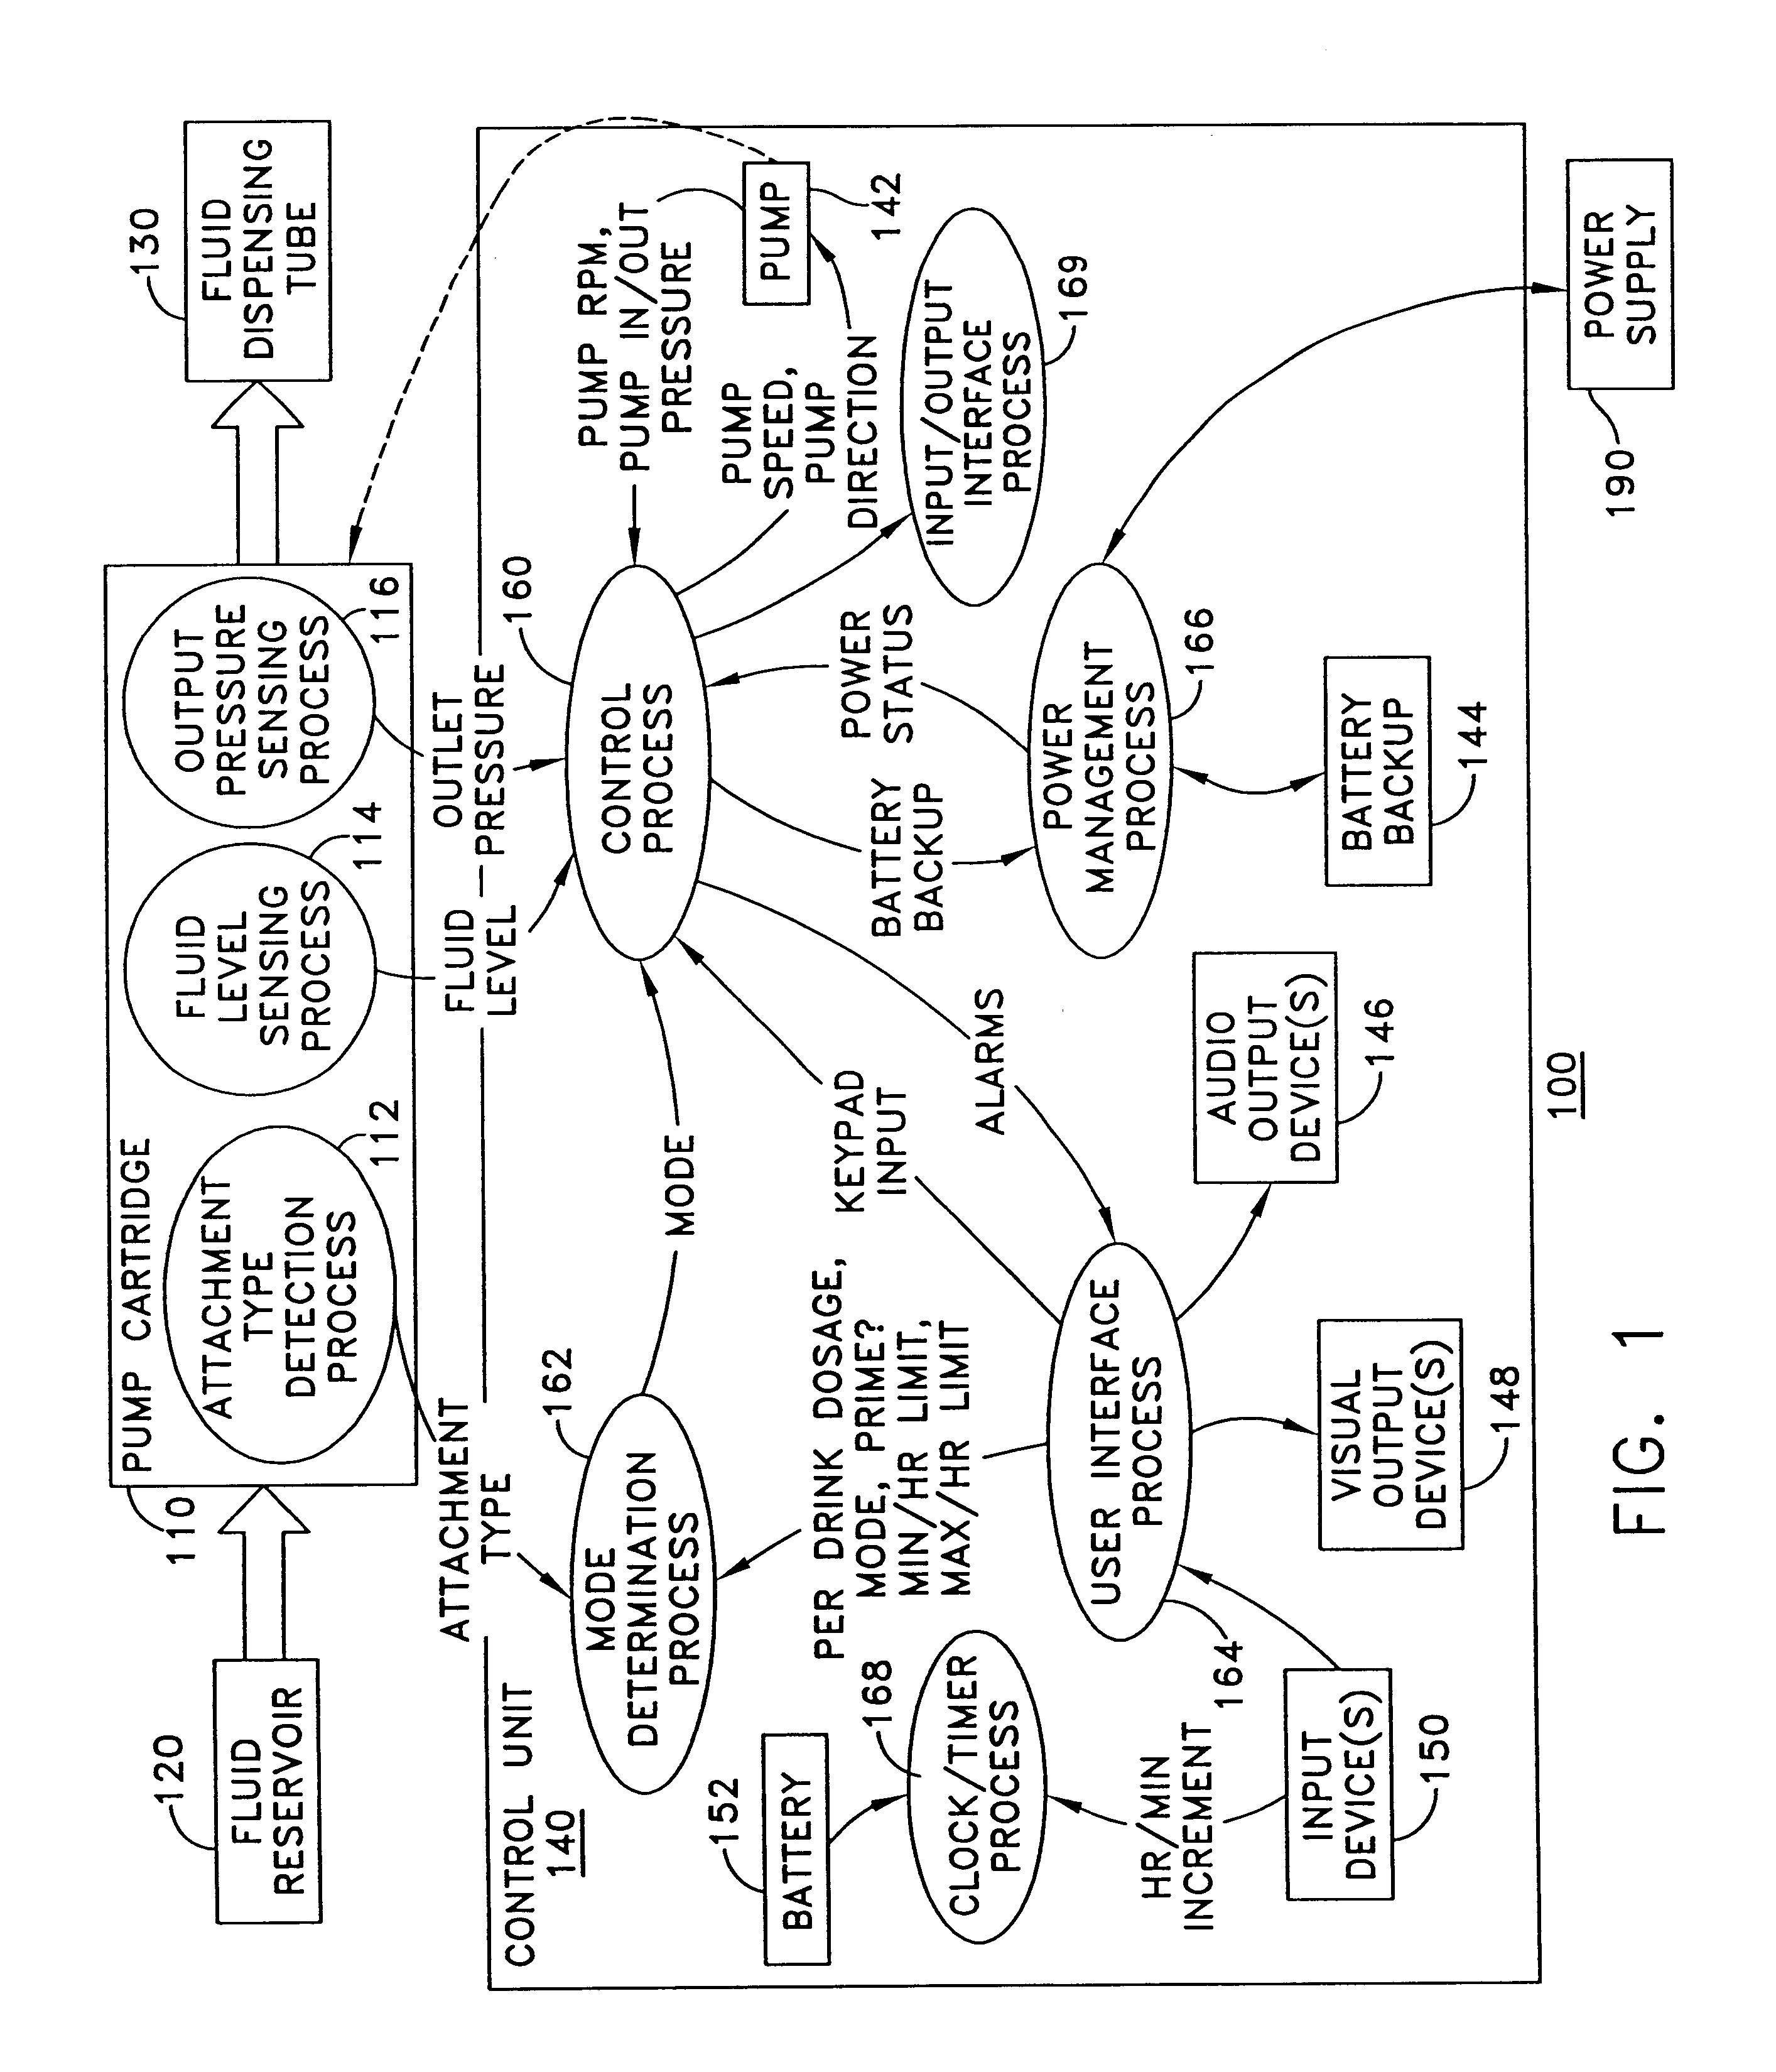 Methods and apparatus for delivering fluids to a patient